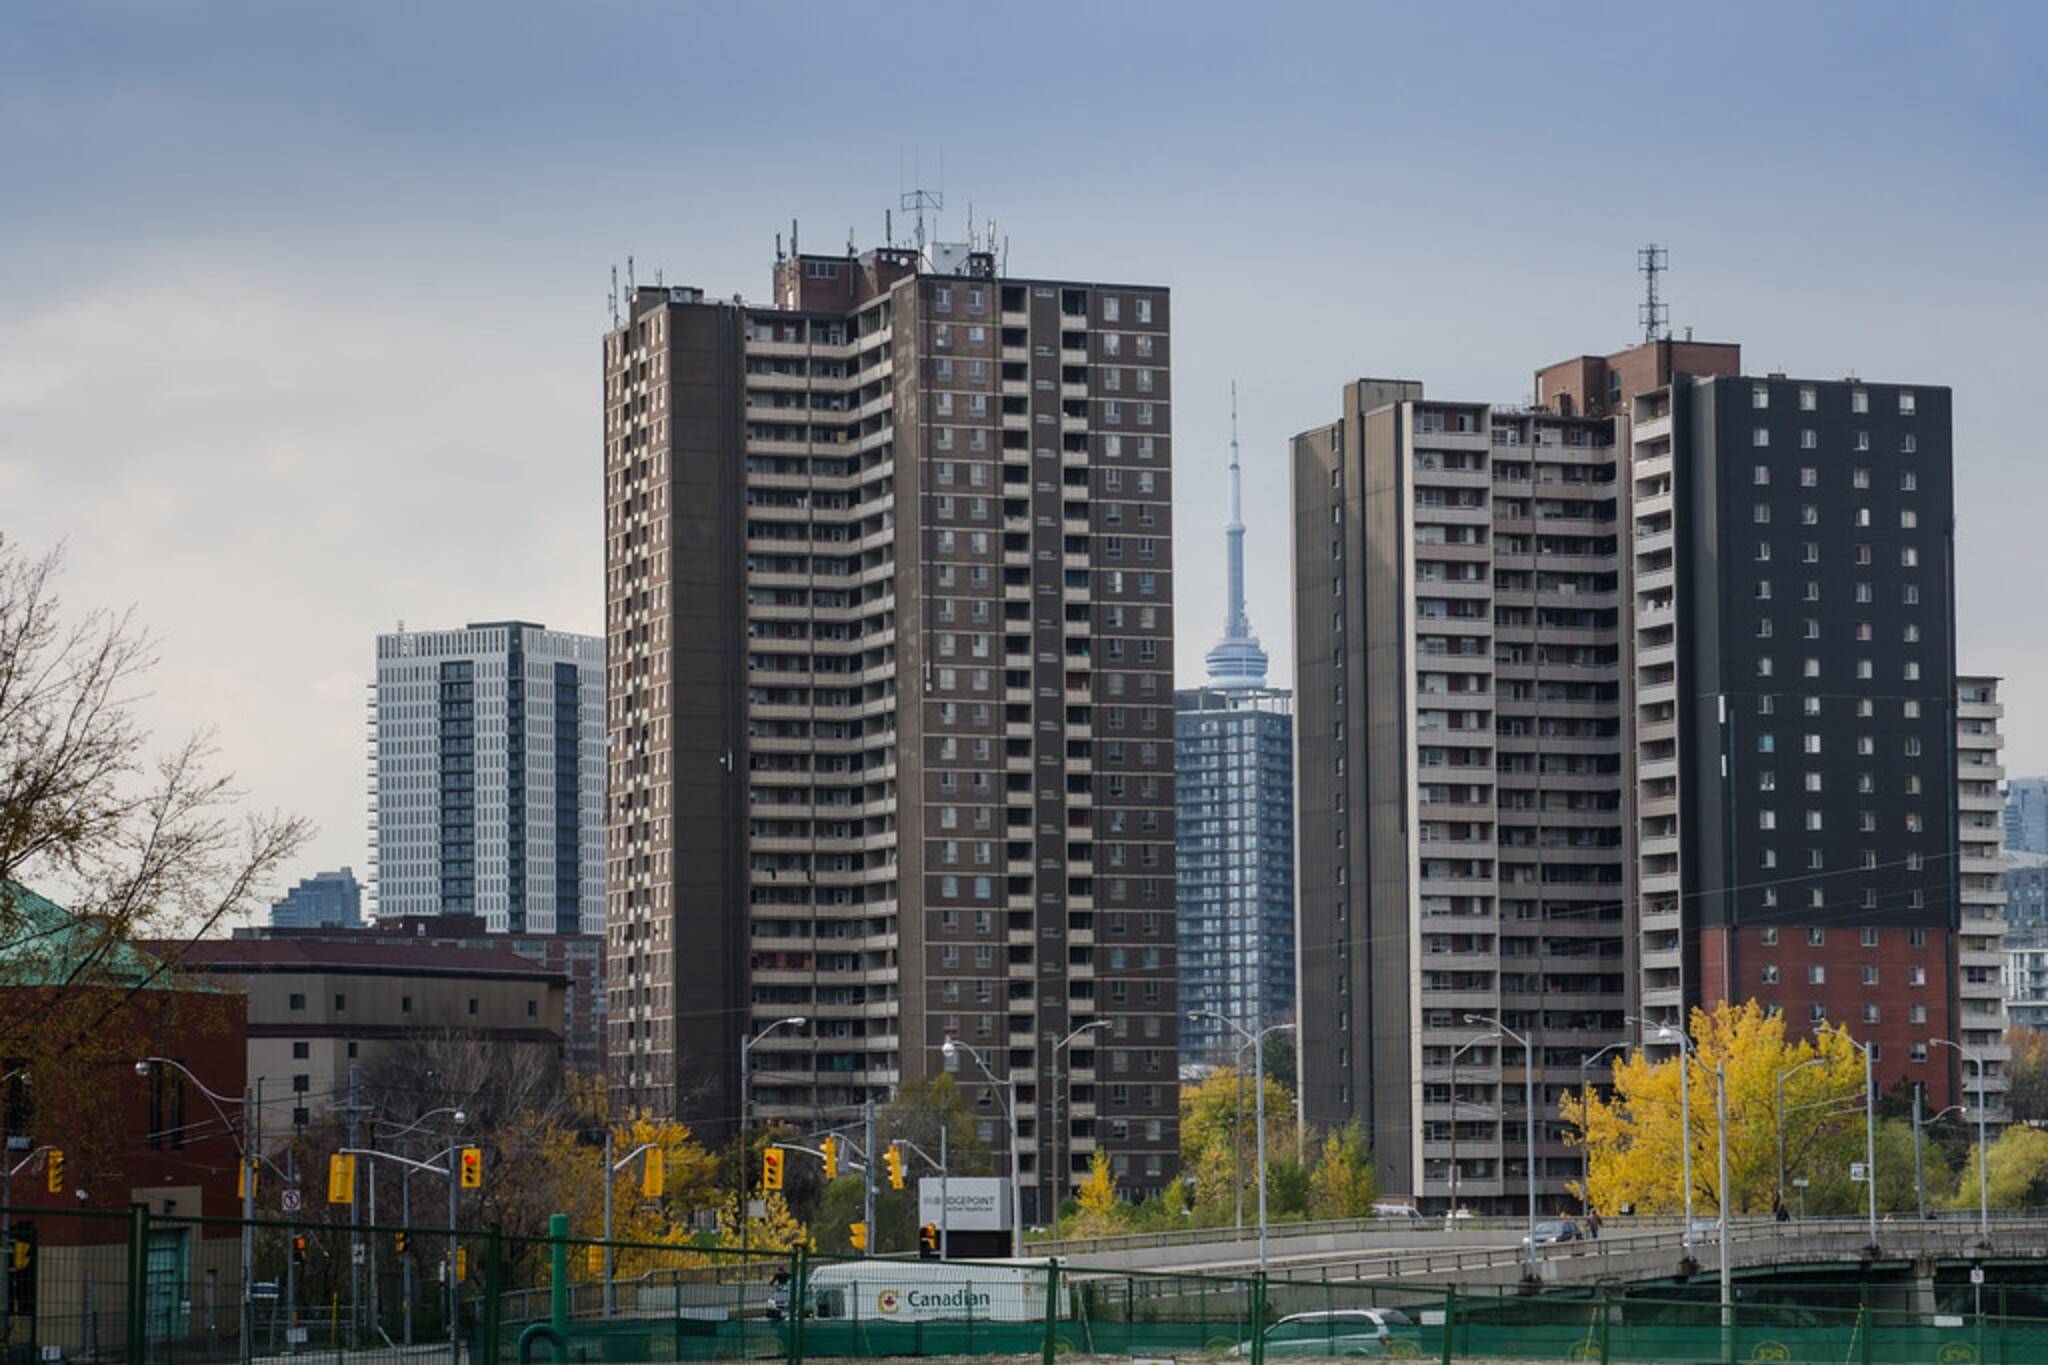 The Average Cost Of A One Bedroom Rental In Toronto Climbs